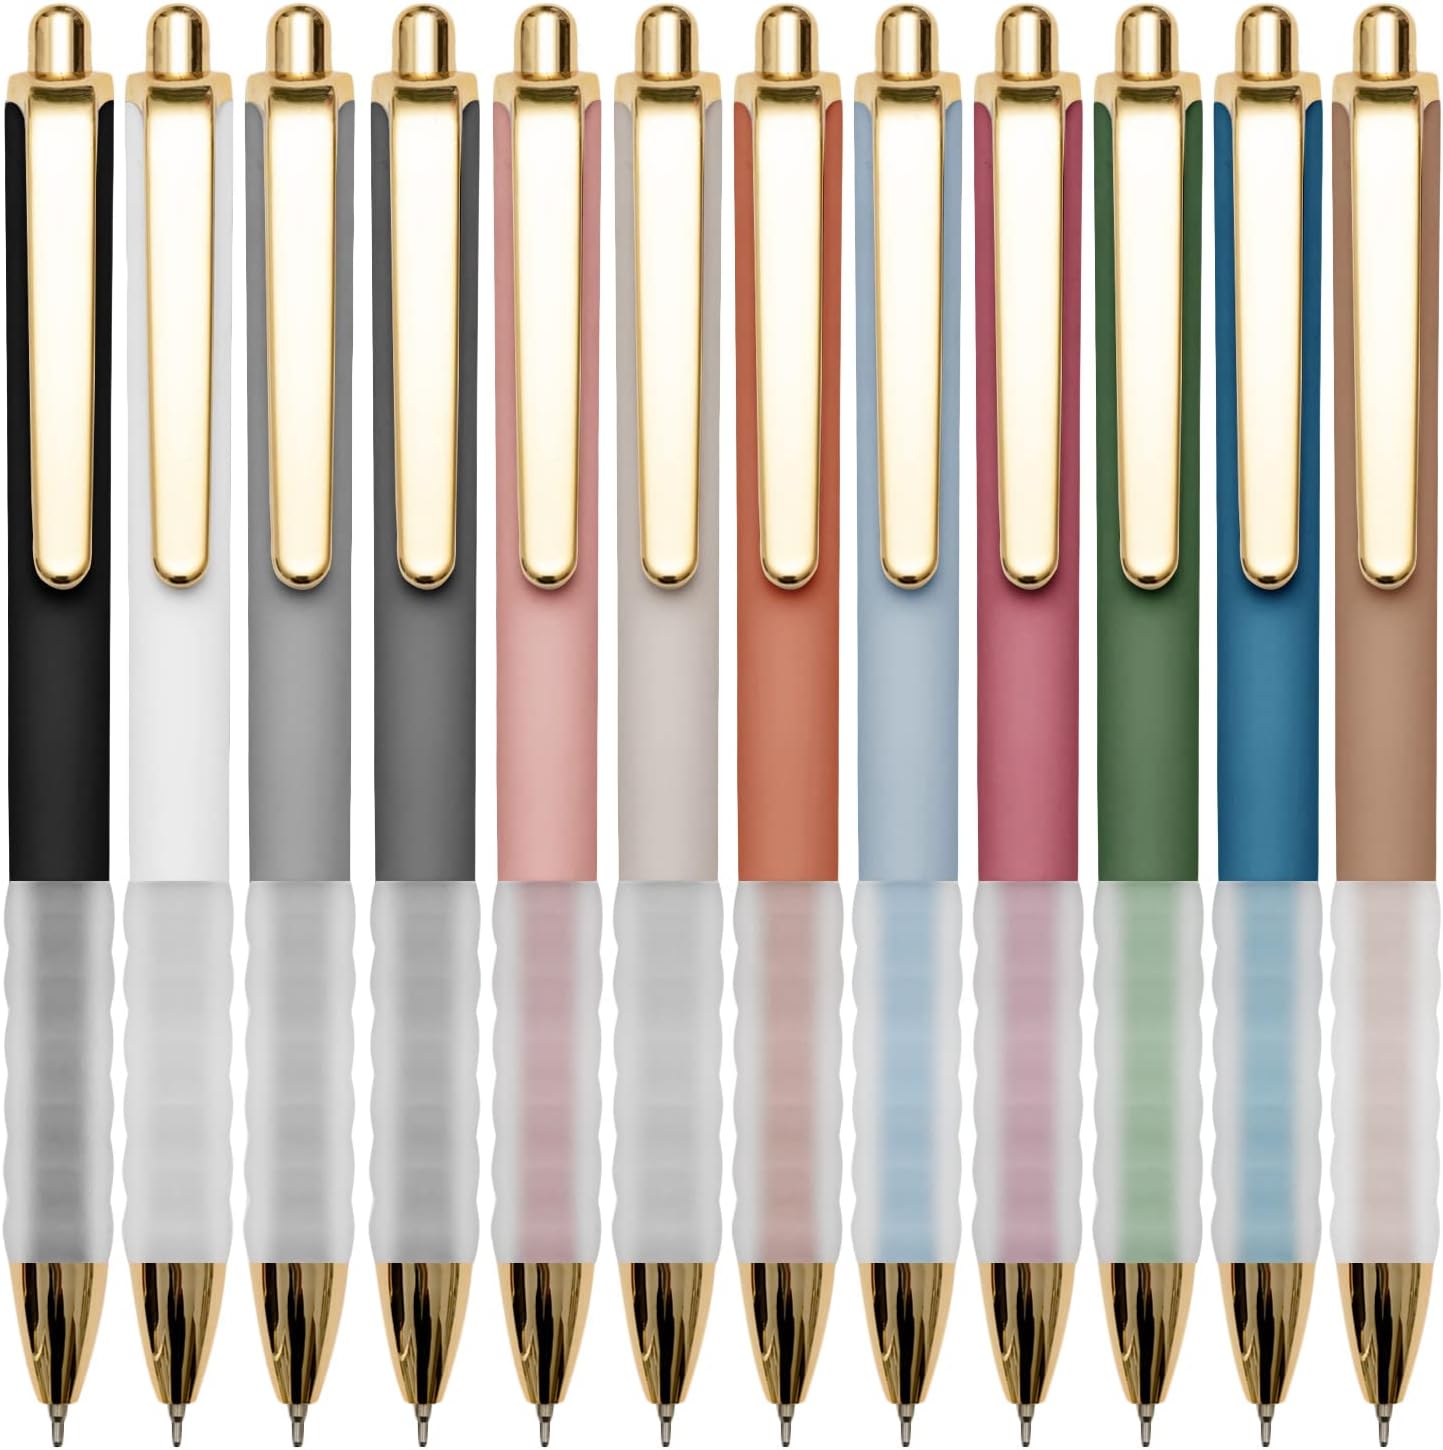 Limited-Time Discounts! Save on Linbsunne Ballpoint Pens for Men and Women!